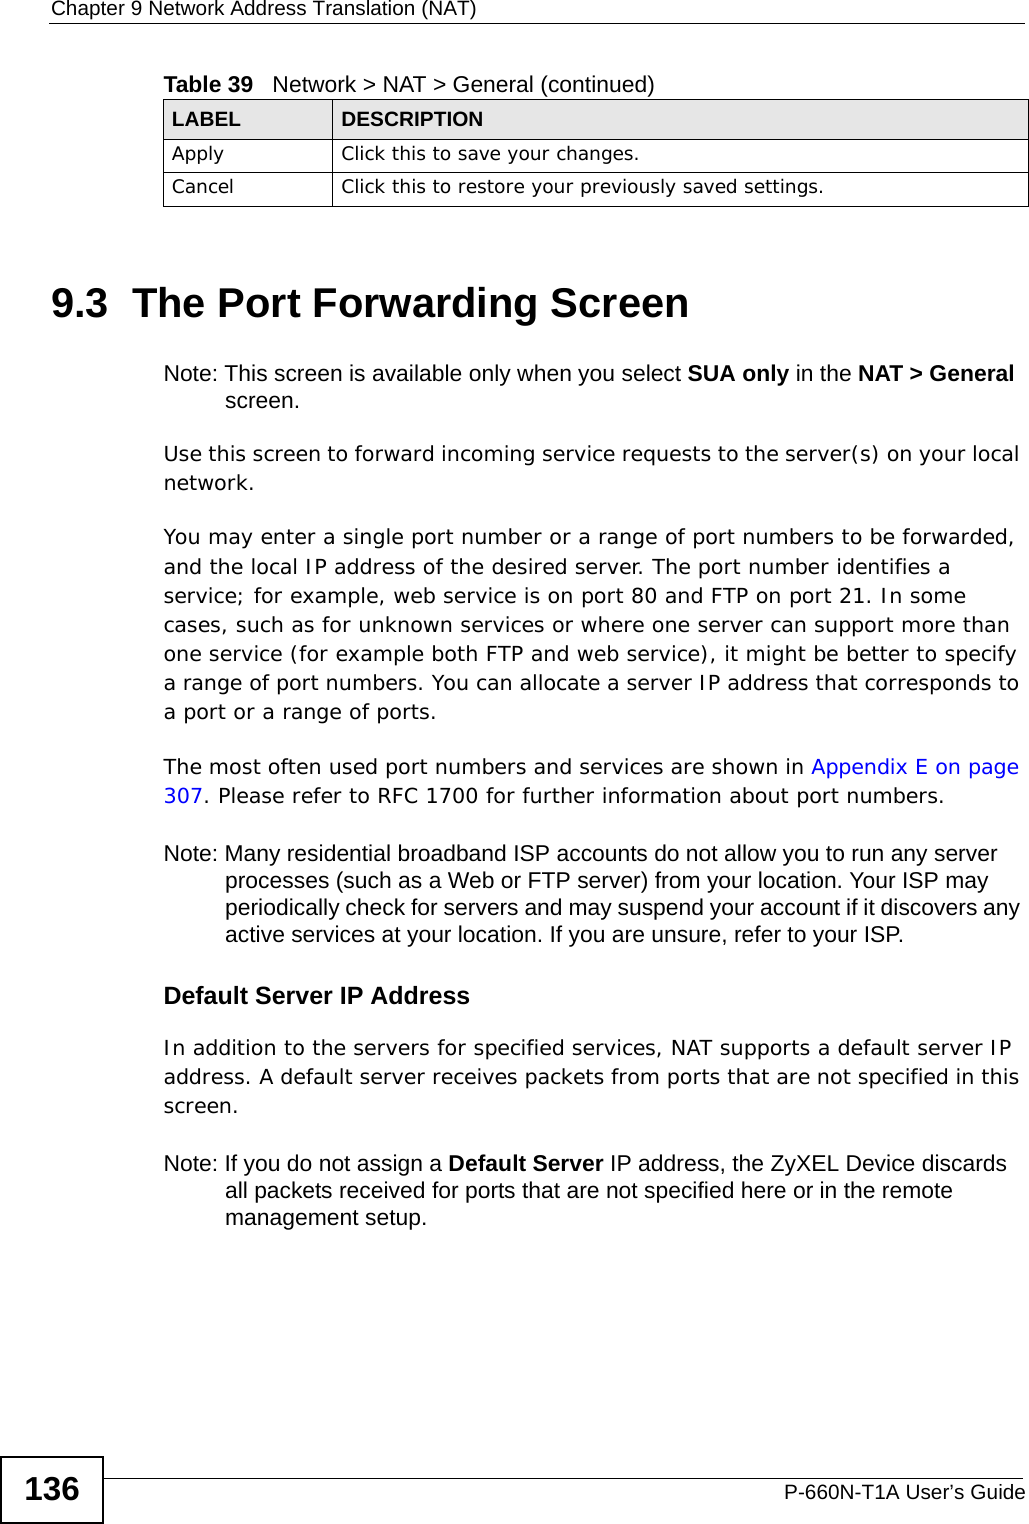 Chapter 9 Network Address Translation (NAT)P-660N-T1A User’s Guide1369.3  The Port Forwarding ScreenNote: This screen is available only when you select SUA only in the NAT &gt; General screen.Use this screen to forward incoming service requests to the server(s) on your local network.You may enter a single port number or a range of port numbers to be forwarded, and the local IP address of the desired server. The port number identifies a service; for example, web service is on port 80 and FTP on port 21. In some cases, such as for unknown services or where one server can support more than one service (for example both FTP and web service), it might be better to specify a range of port numbers. You can allocate a server IP address that corresponds to a port or a range of ports.The most often used port numbers and services are shown in Appendix E on page 307. Please refer to RFC 1700 for further information about port numbers. Note: Many residential broadband ISP accounts do not allow you to run any server processes (such as a Web or FTP server) from your location. Your ISP may periodically check for servers and may suspend your account if it discovers any active services at your location. If you are unsure, refer to your ISP.Default Server IP AddressIn addition to the servers for specified services, NAT supports a default server IP address. A default server receives packets from ports that are not specified in this screen.Note: If you do not assign a Default Server IP address, the ZyXEL Device discards all packets received for ports that are not specified here or in the remote management setup.Apply Click this to save your changes.Cancel Click this to restore your previously saved settings.Table 39   Network &gt; NAT &gt; General (continued)LABEL DESCRIPTION